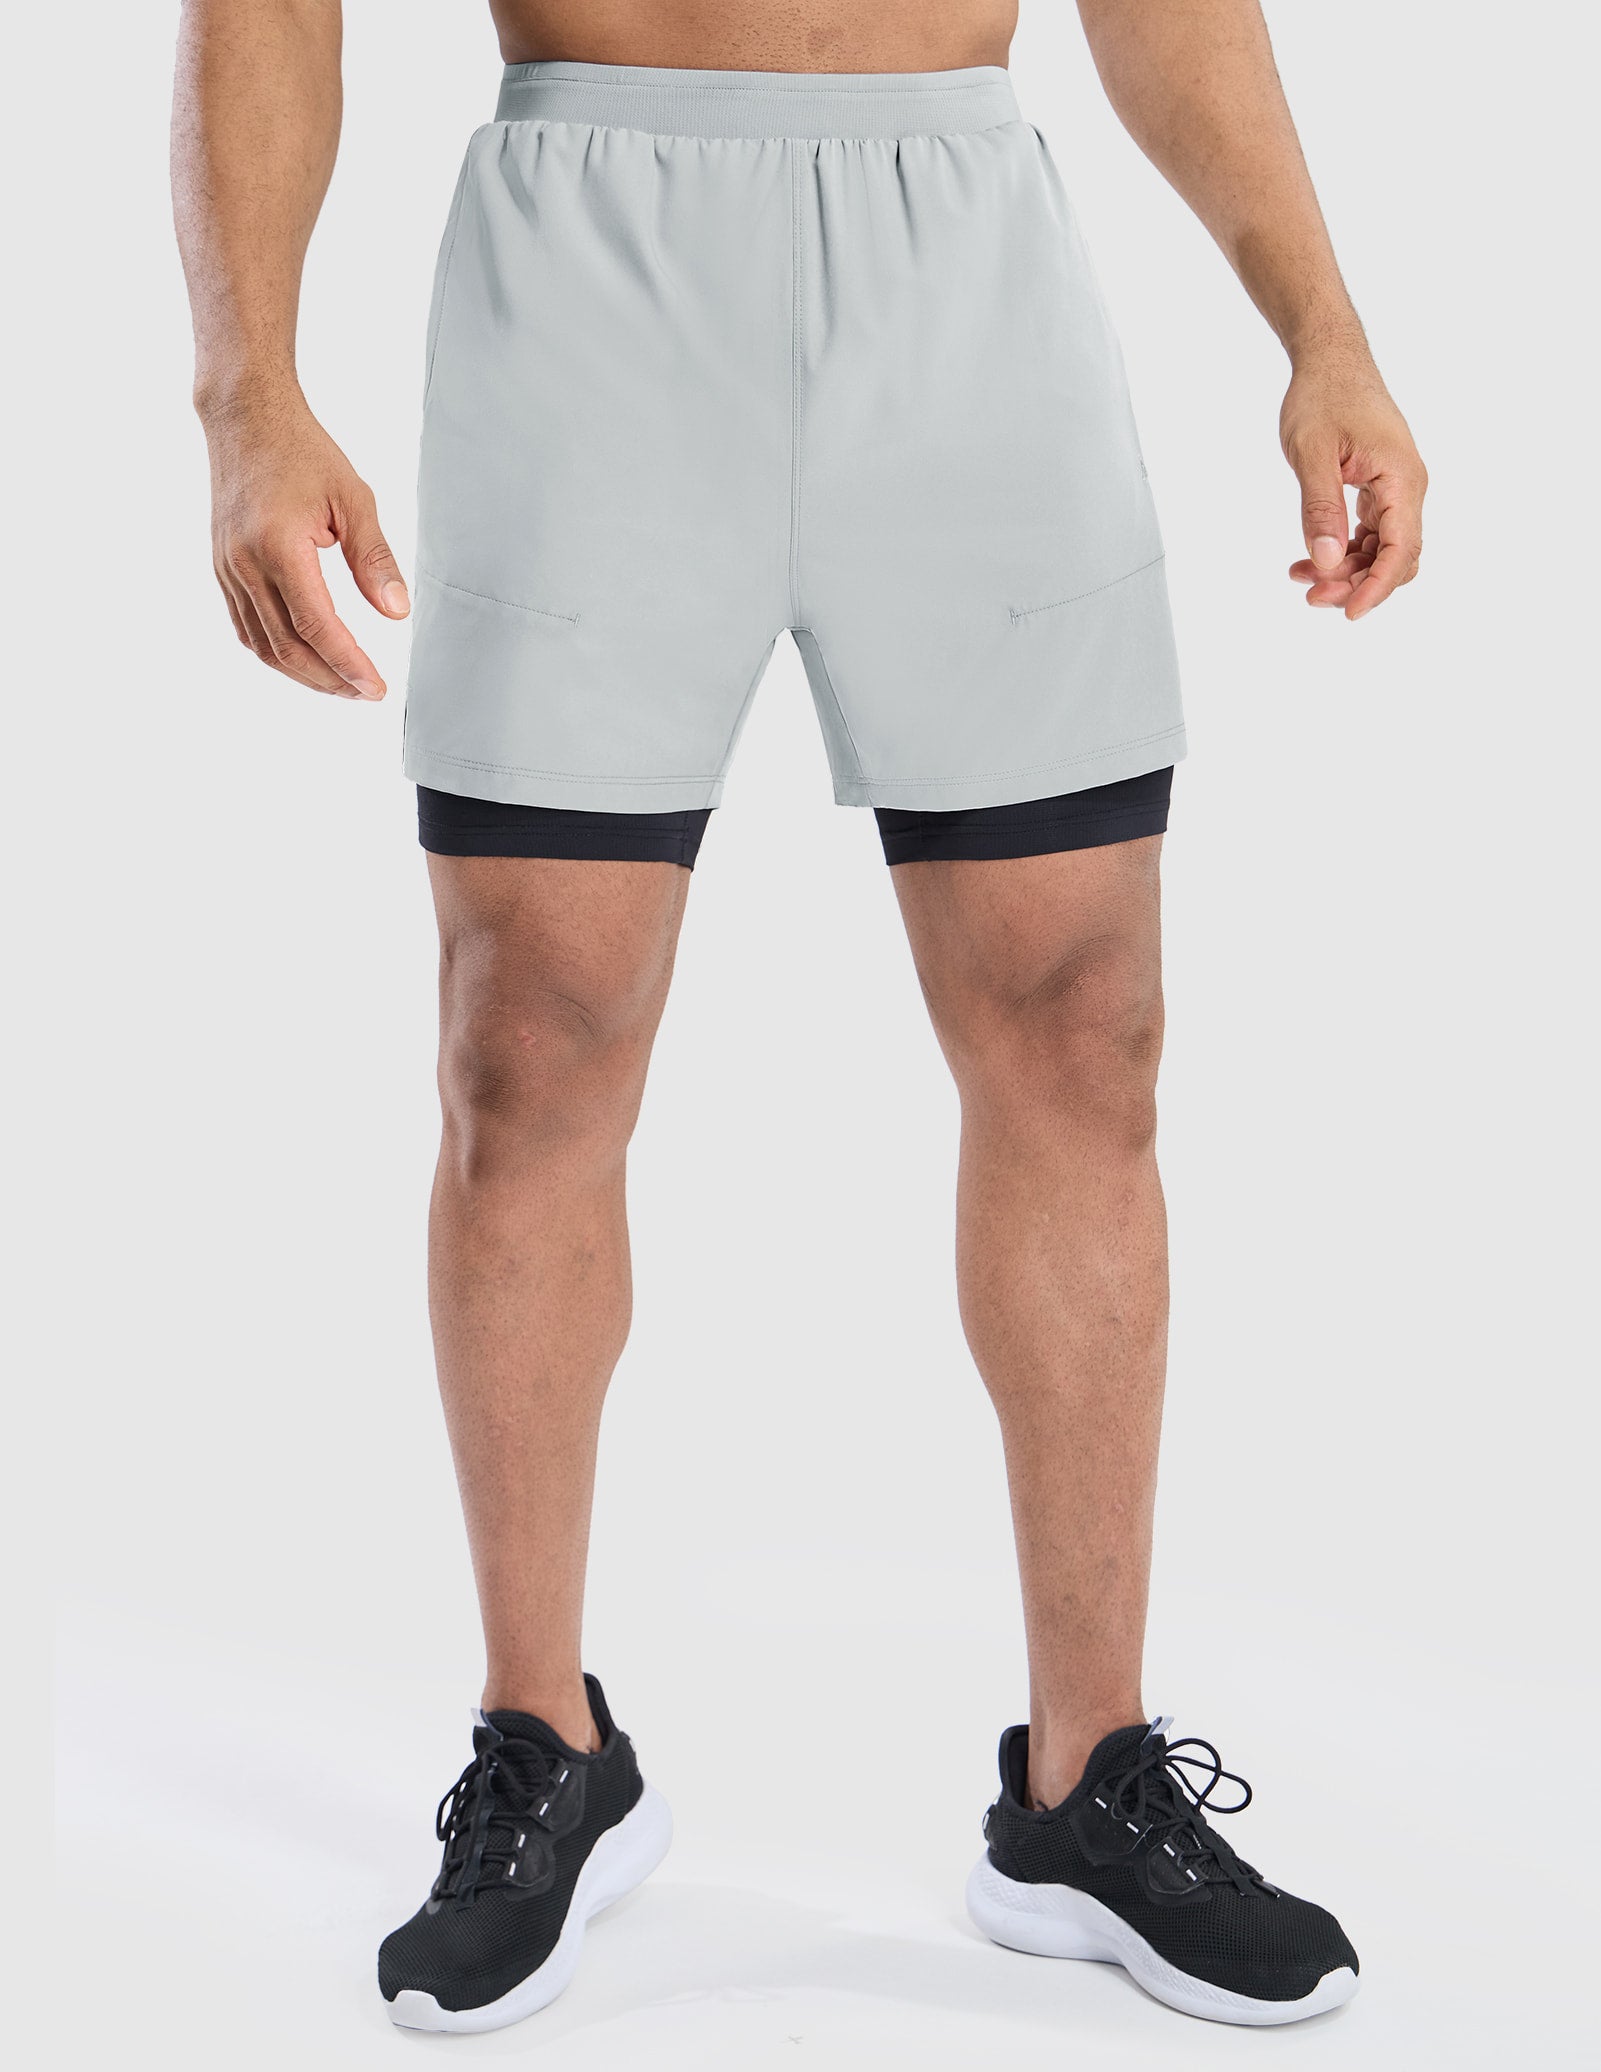 Men's 2 in 1 Running Shorts with Liner 5" Quick Dry Athletic Shorts